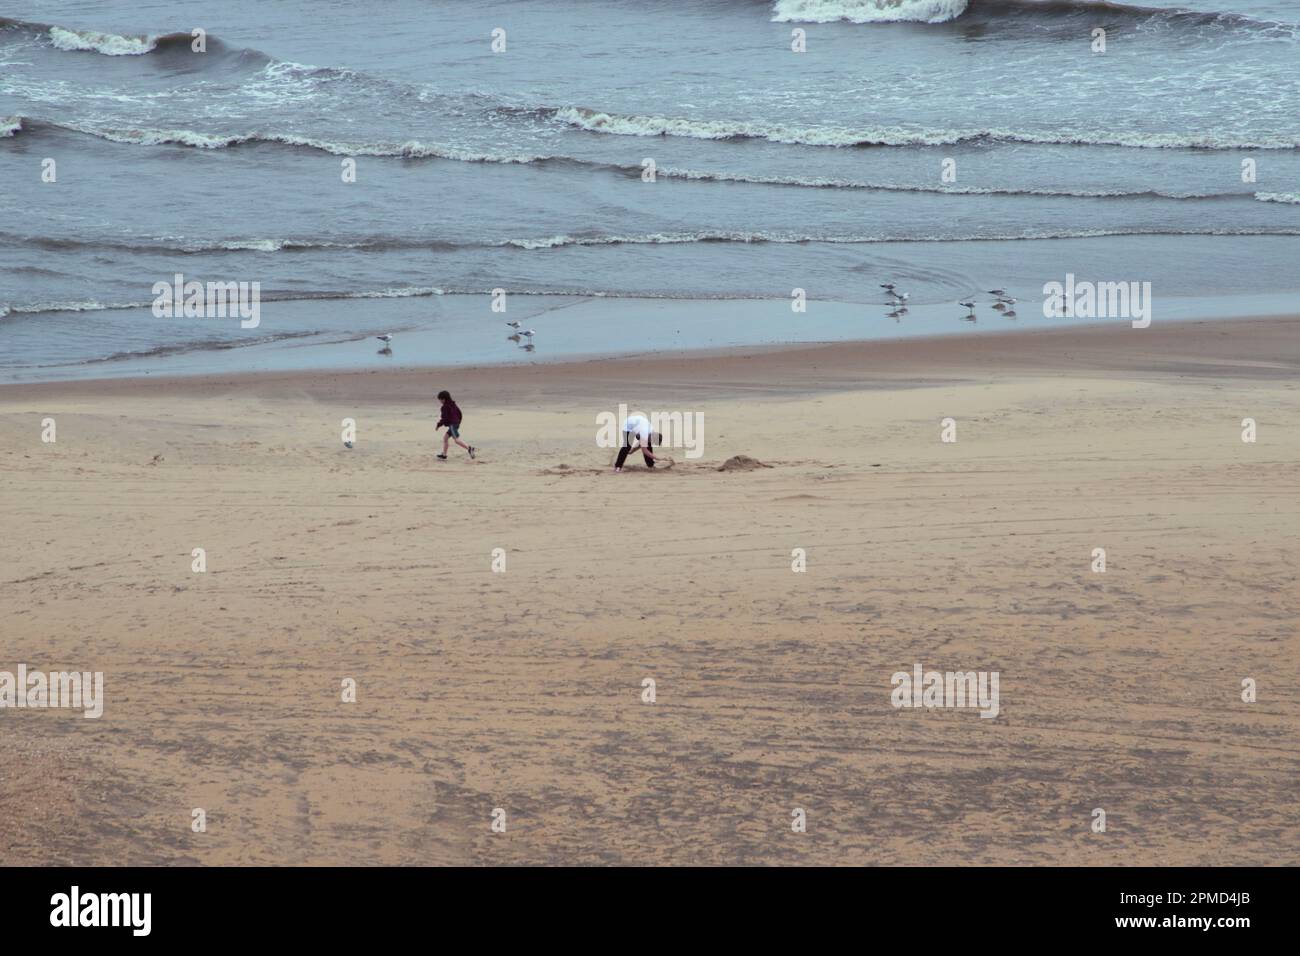 People enjoying a holiday on Virginia Beach, on a sunny day. Stock Photo